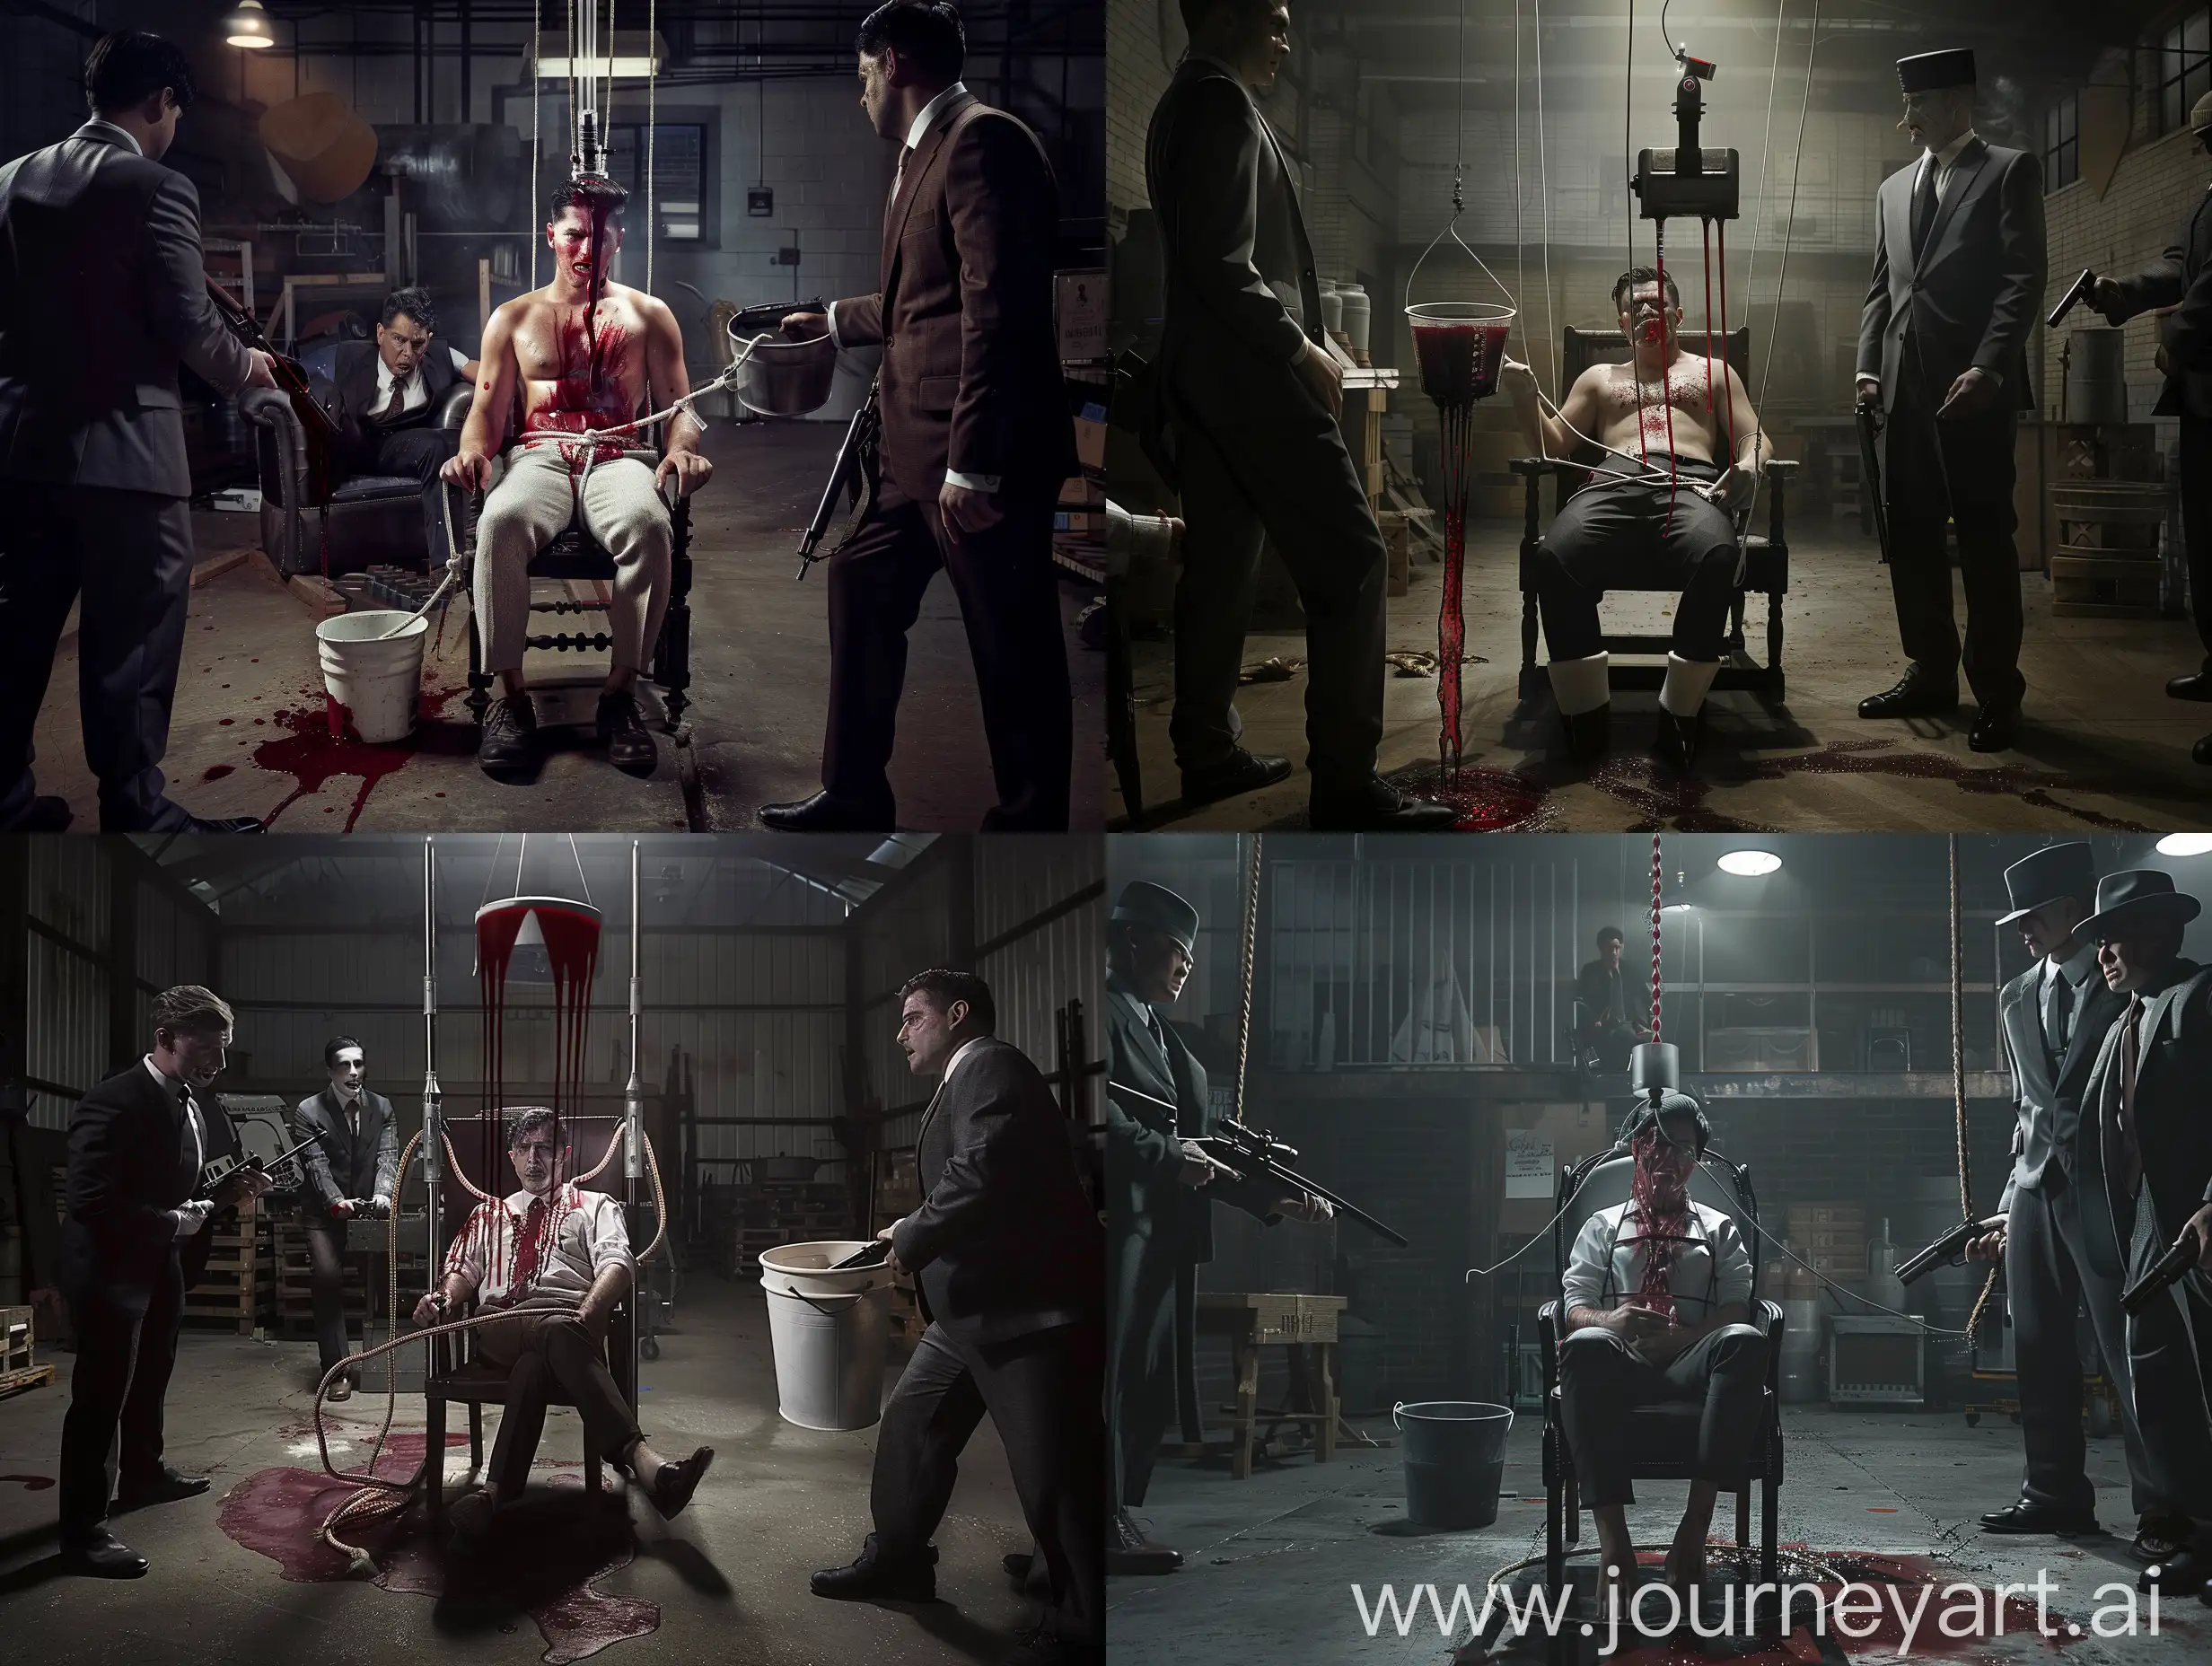 photo-realistic, a man is tied to a chair as a blood transfusion machine drains his  blood into a bucket,he is surrounded by two gangsters in suits with guns in a dark warehouse,atmospheric lighting 